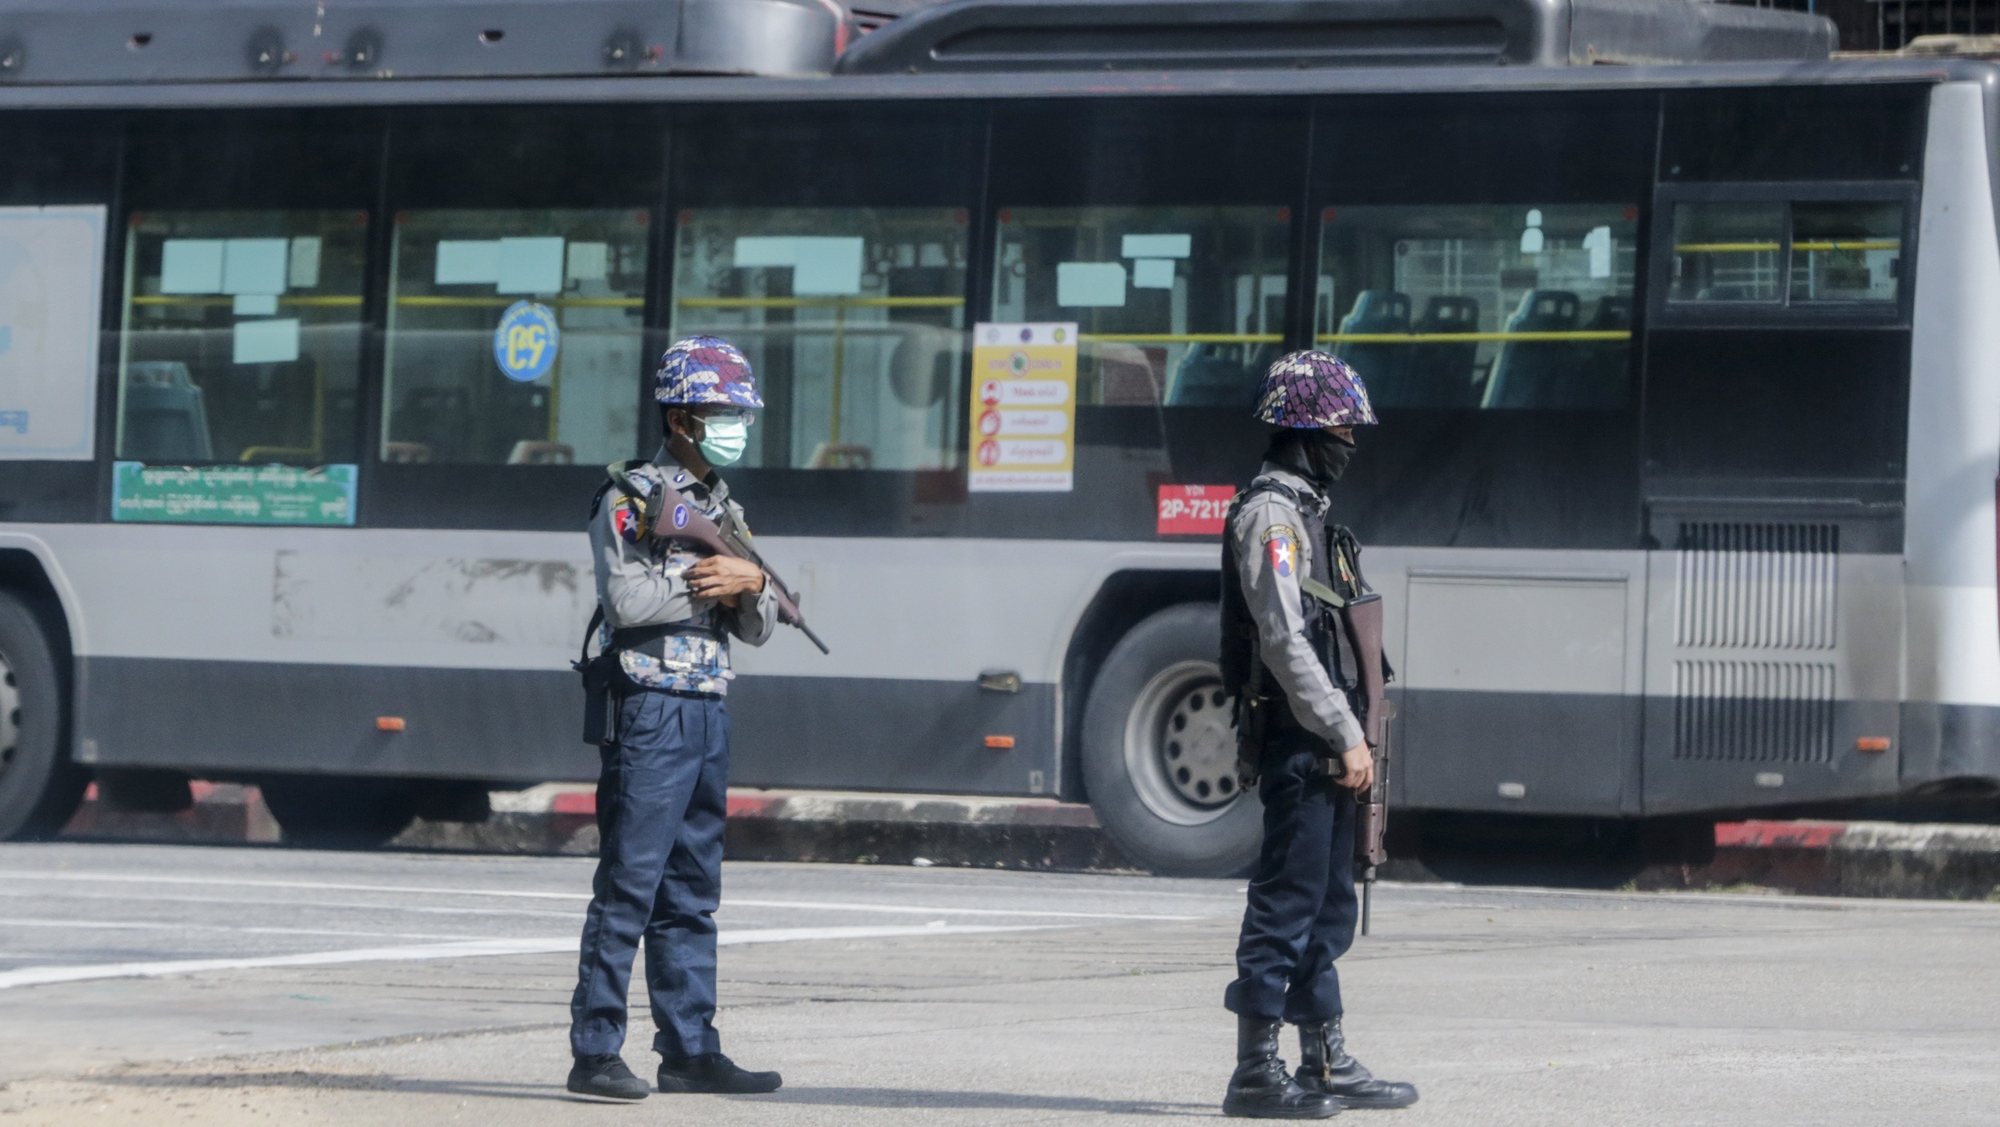 epa09408114 Armed policemen stand guard as they block a road after several explosions occurred at downtown area in Yangon, Myanmar, 10 August 2021. Reports indicate at least five explosions occurred in the afternoon of 10 August. No casualties or injuries reported by authority.  EPA/STRINGER